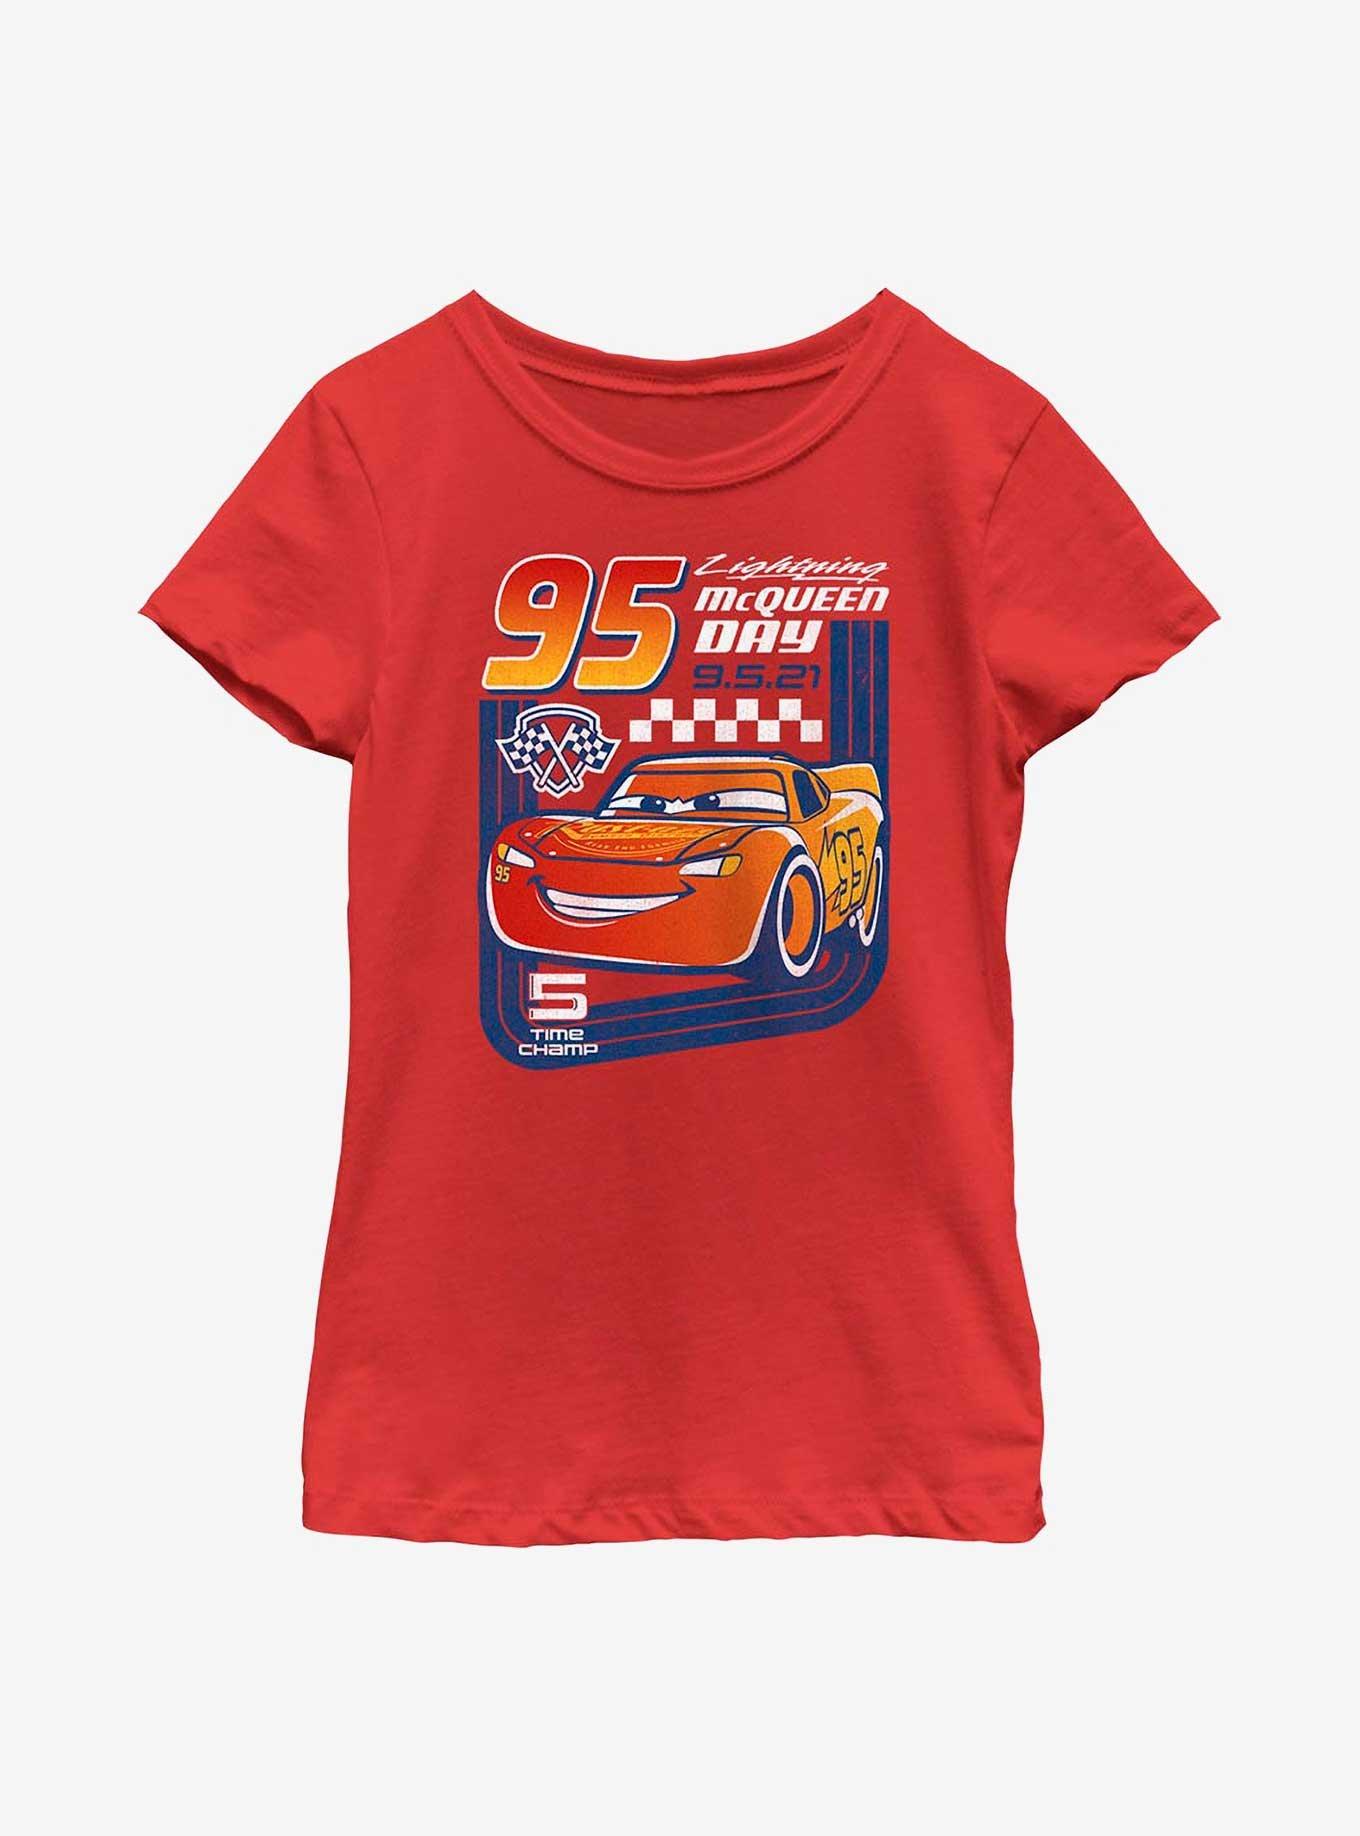 Disney Pixar Cars 95 McQueen Day Youth Girls T-Shirt, RED, hi-res